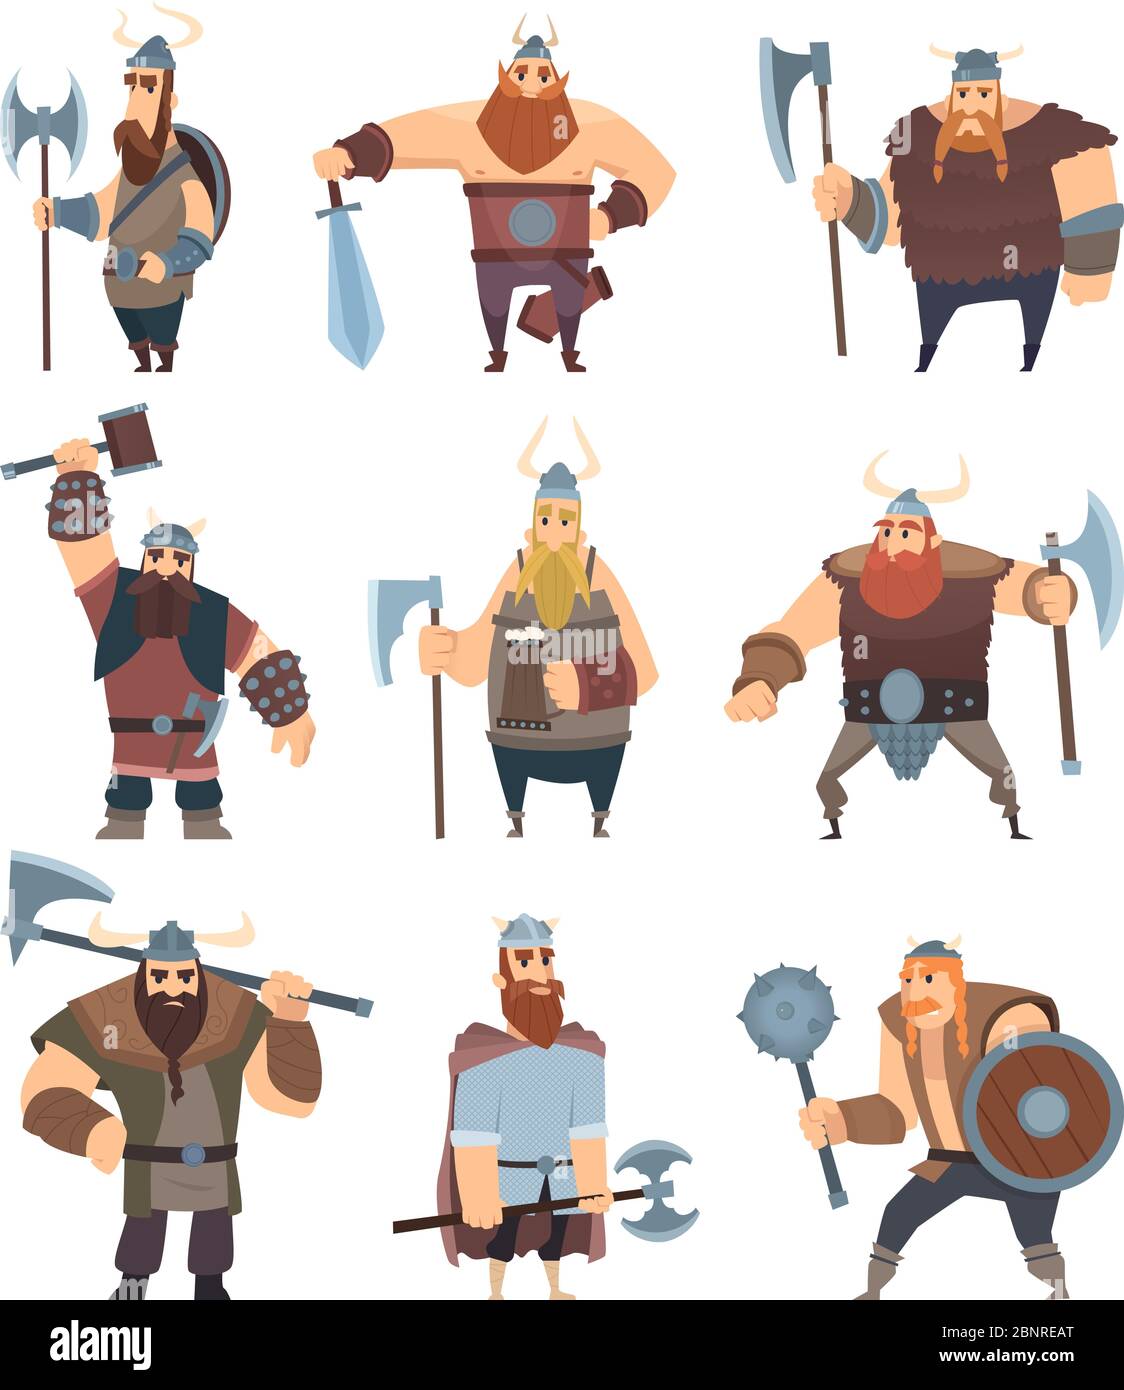 Viking cartoon. Mythology of medieval warrior norse people vector characters Stock Vector